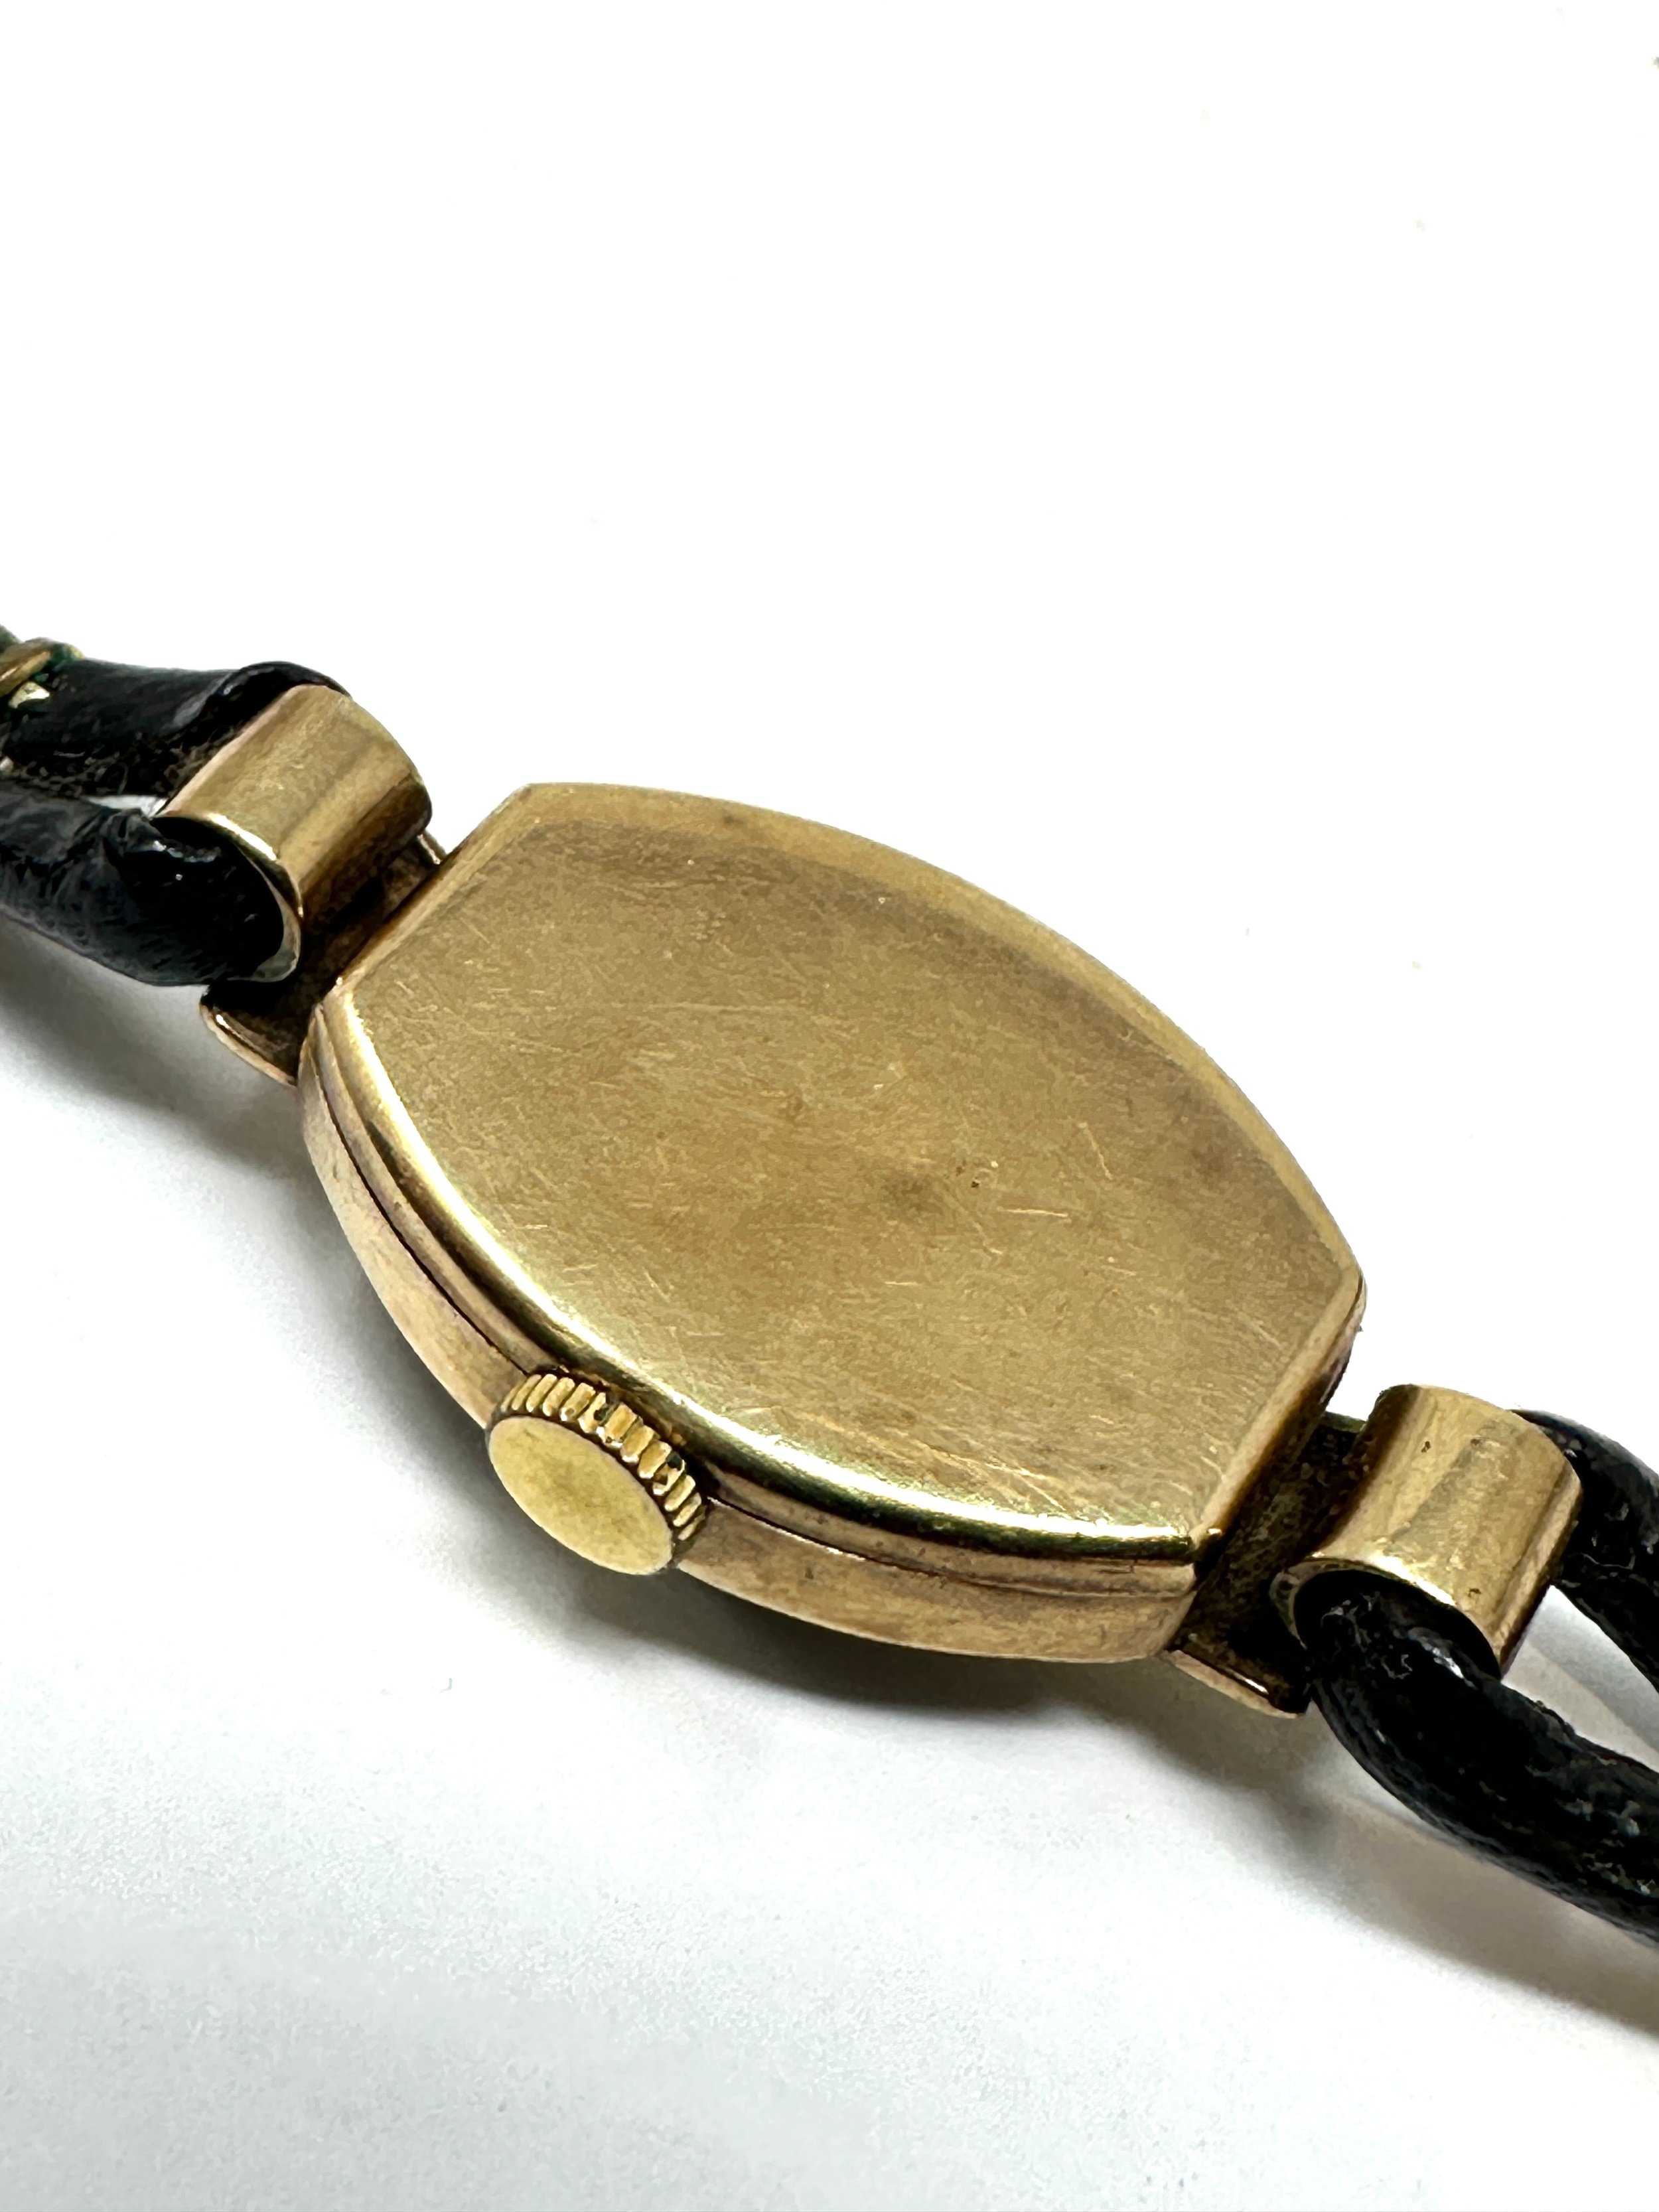 Vintage 9ct gold ladies rolex tudor wristwatch with black leather strap the watch winds and ticks - Image 3 of 4